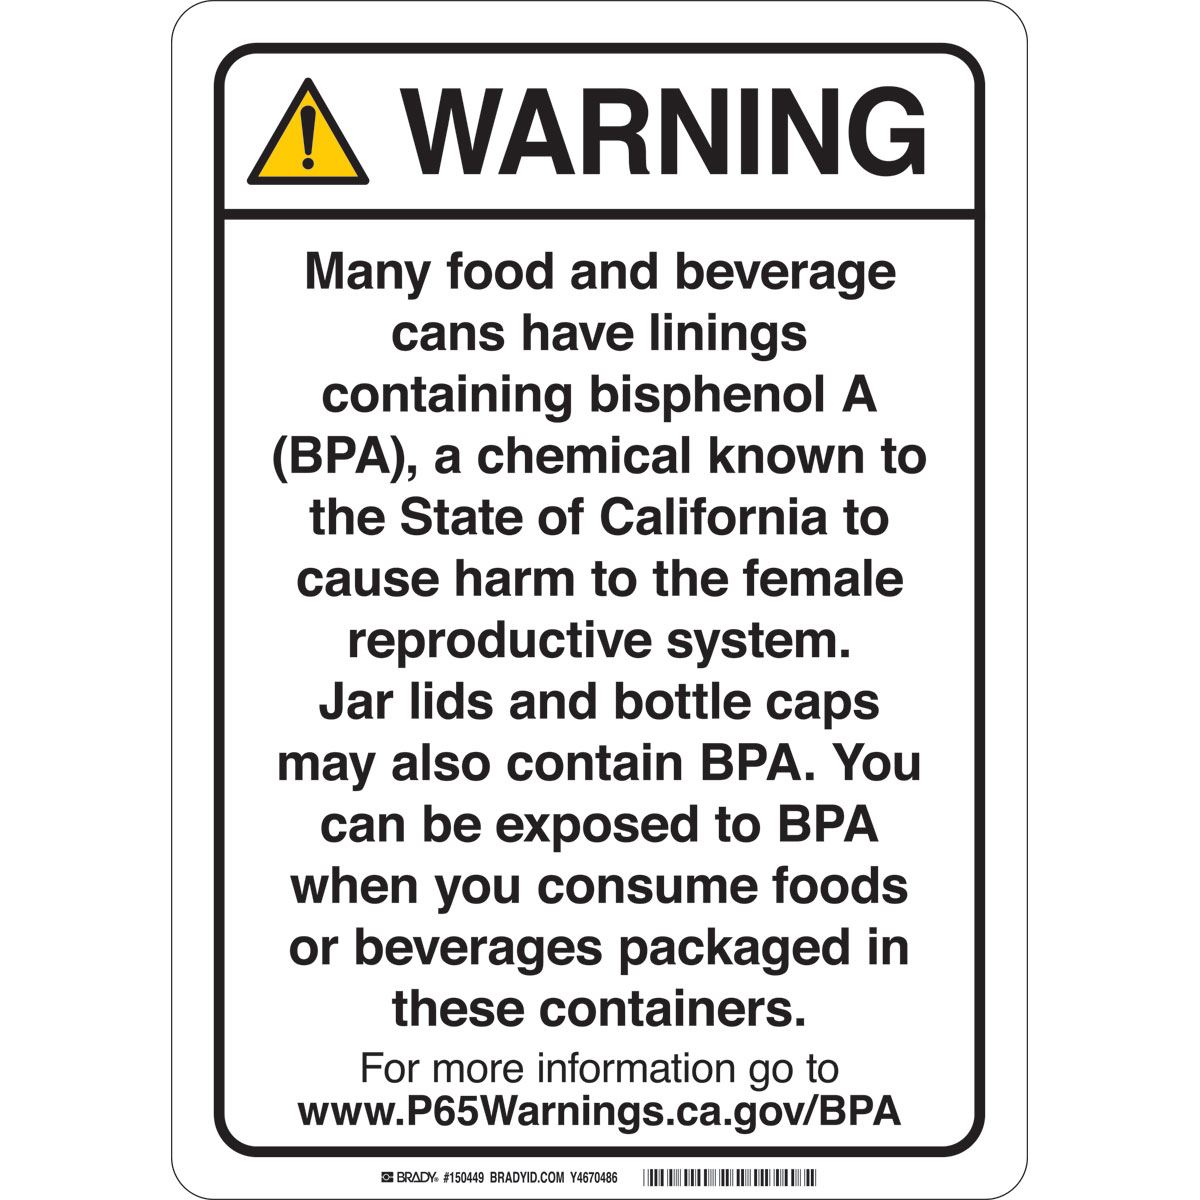 Bisphenol A Exposure from Canned and Bottled Foods and Beverages Warning  Sign - Save 10%